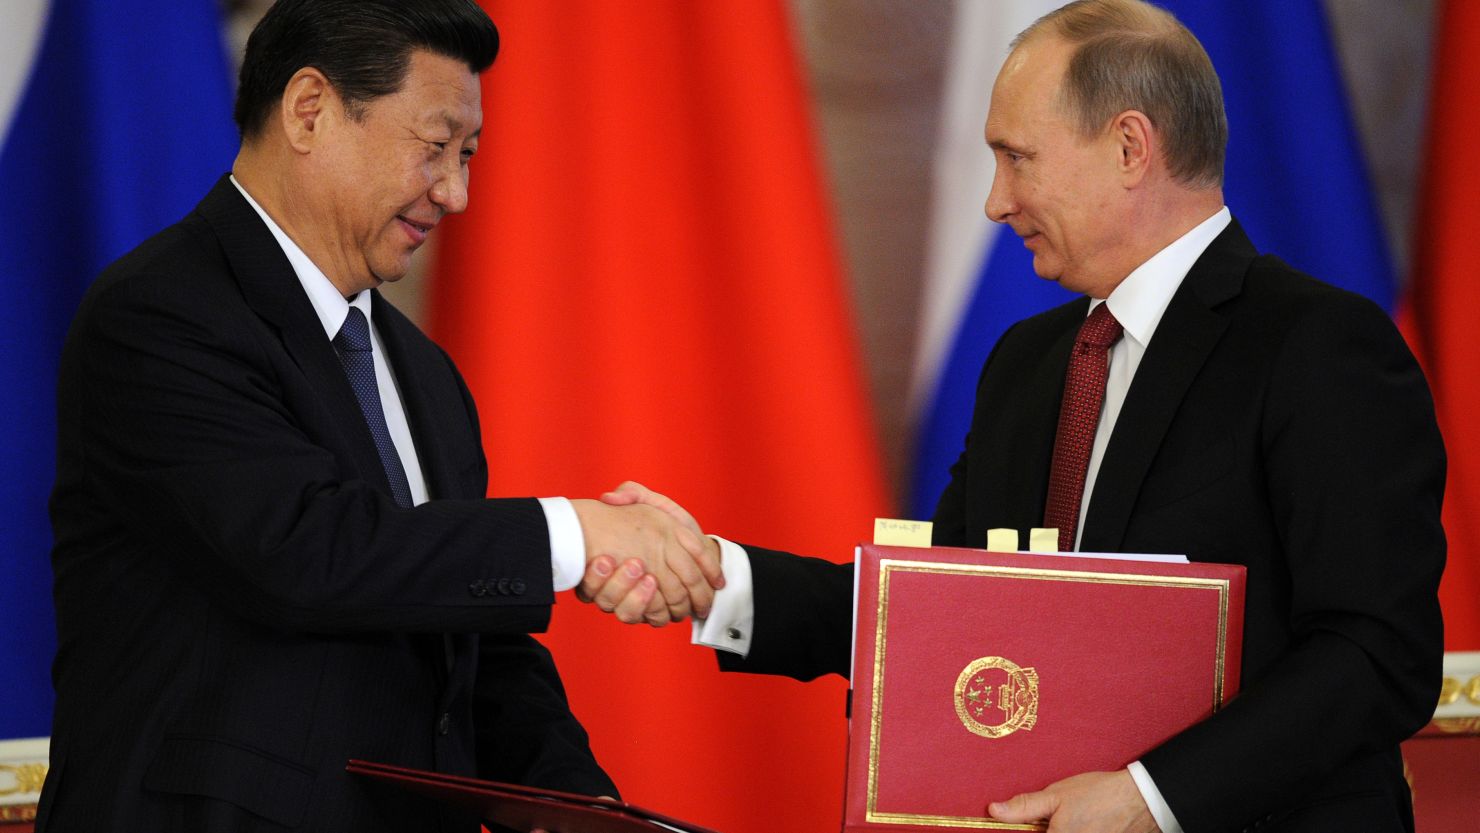 Russia's President Vladimir Putin (R) shakes hands with his Chinese counterpart Xi Jinping in Moscow, on March 22, 2013.